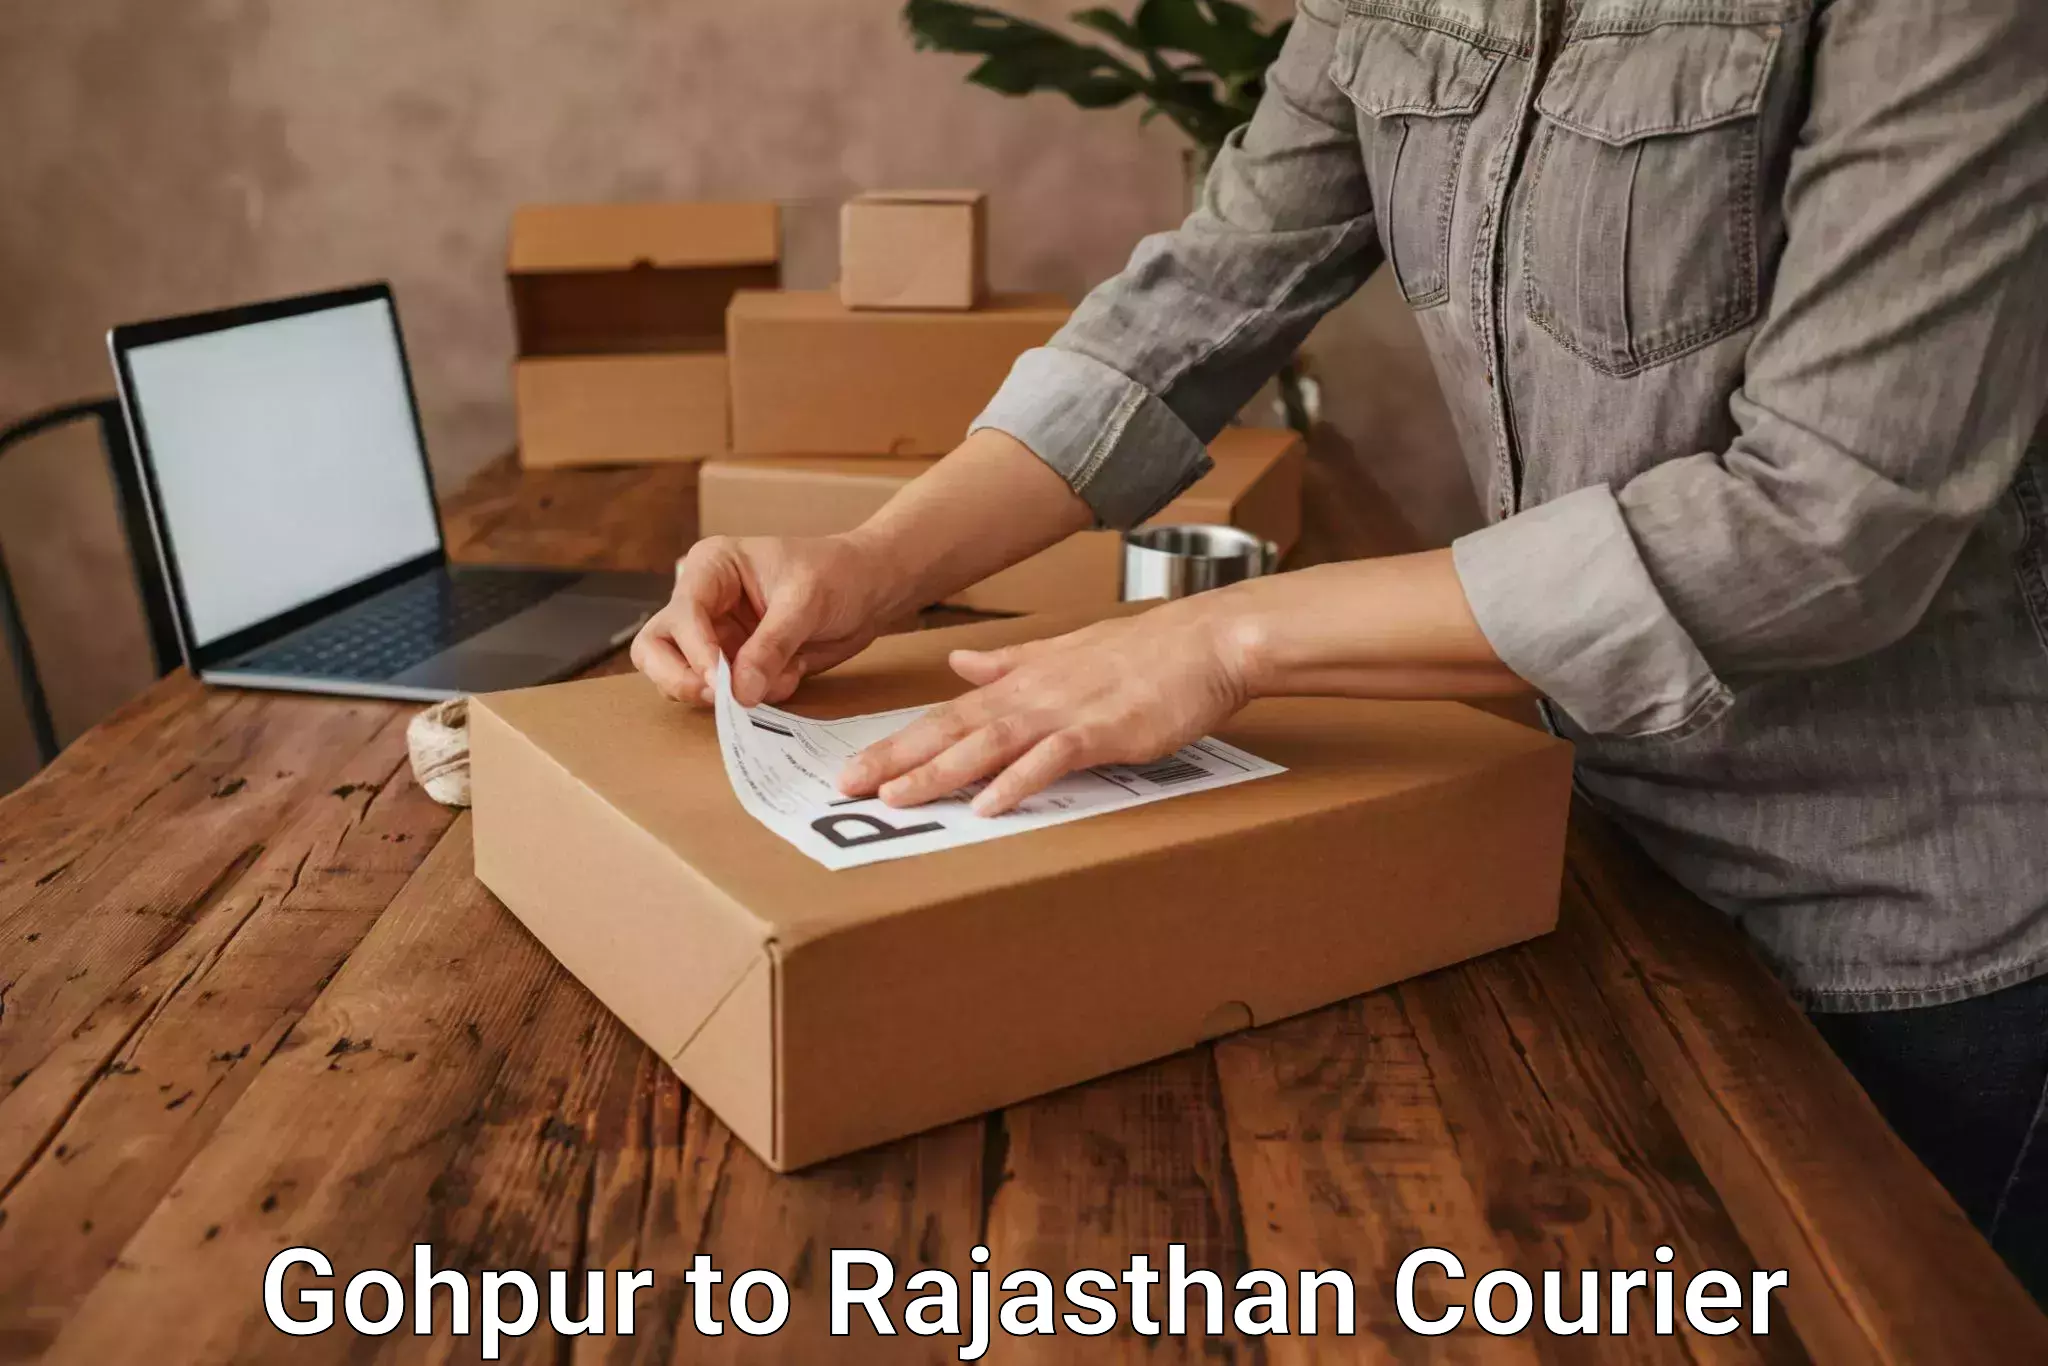 Parcel service for businesses Gohpur to Rajasthan